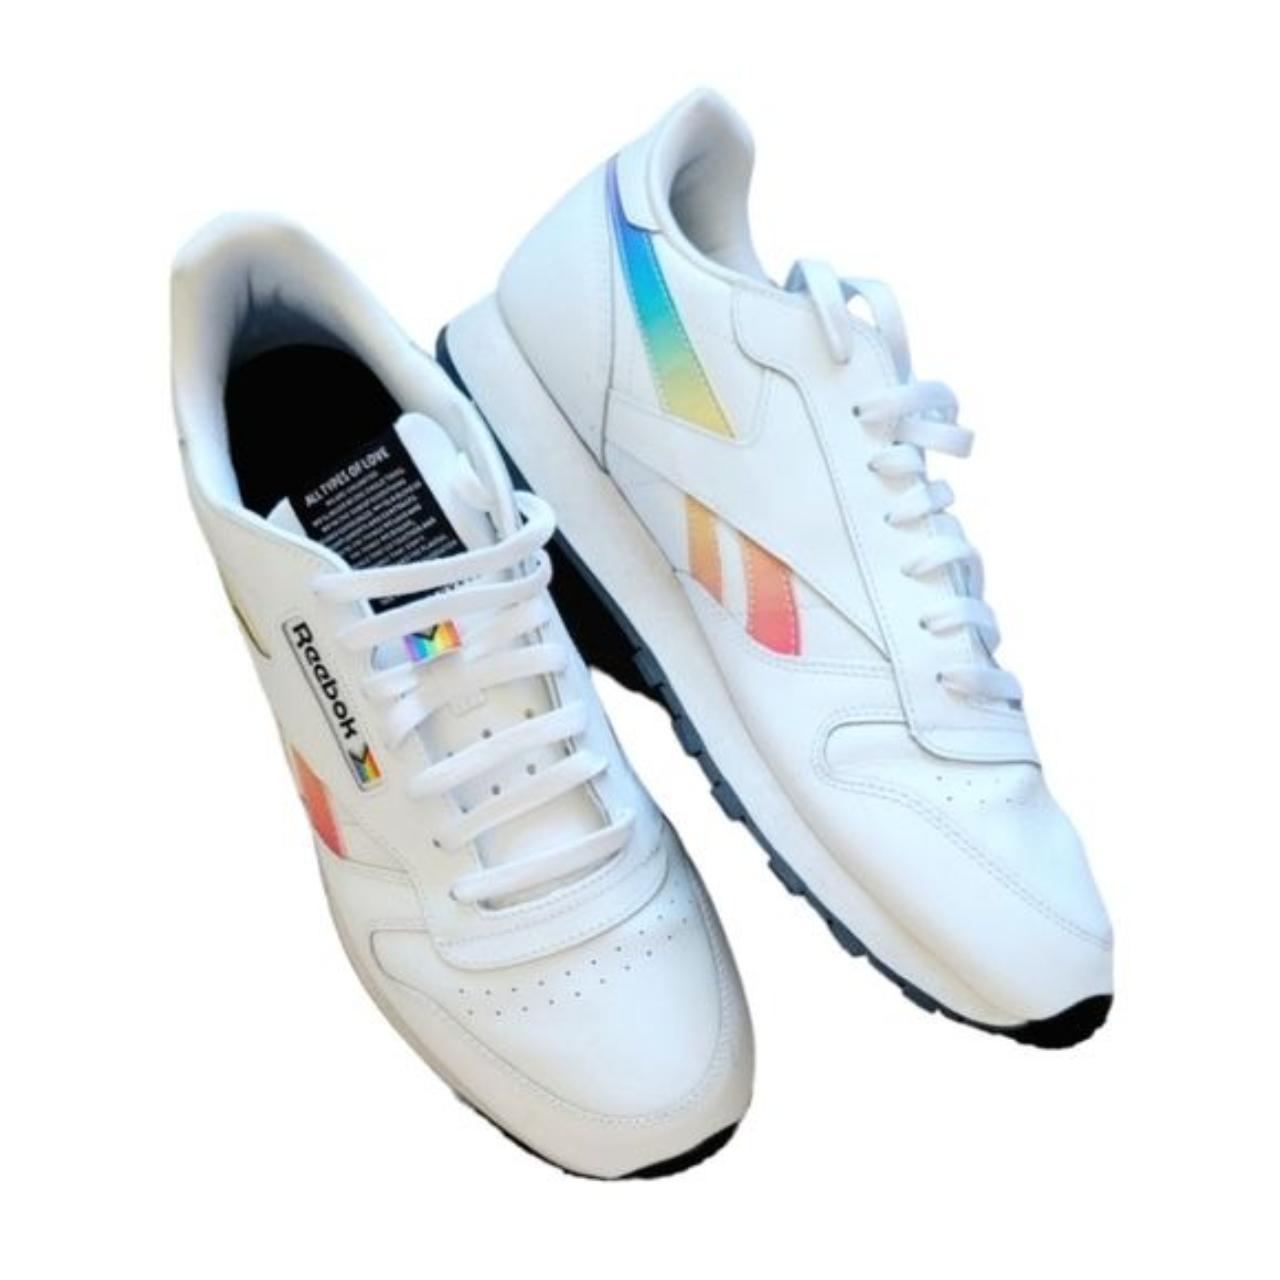 classic leather Reebok sneakers with - Depop pride